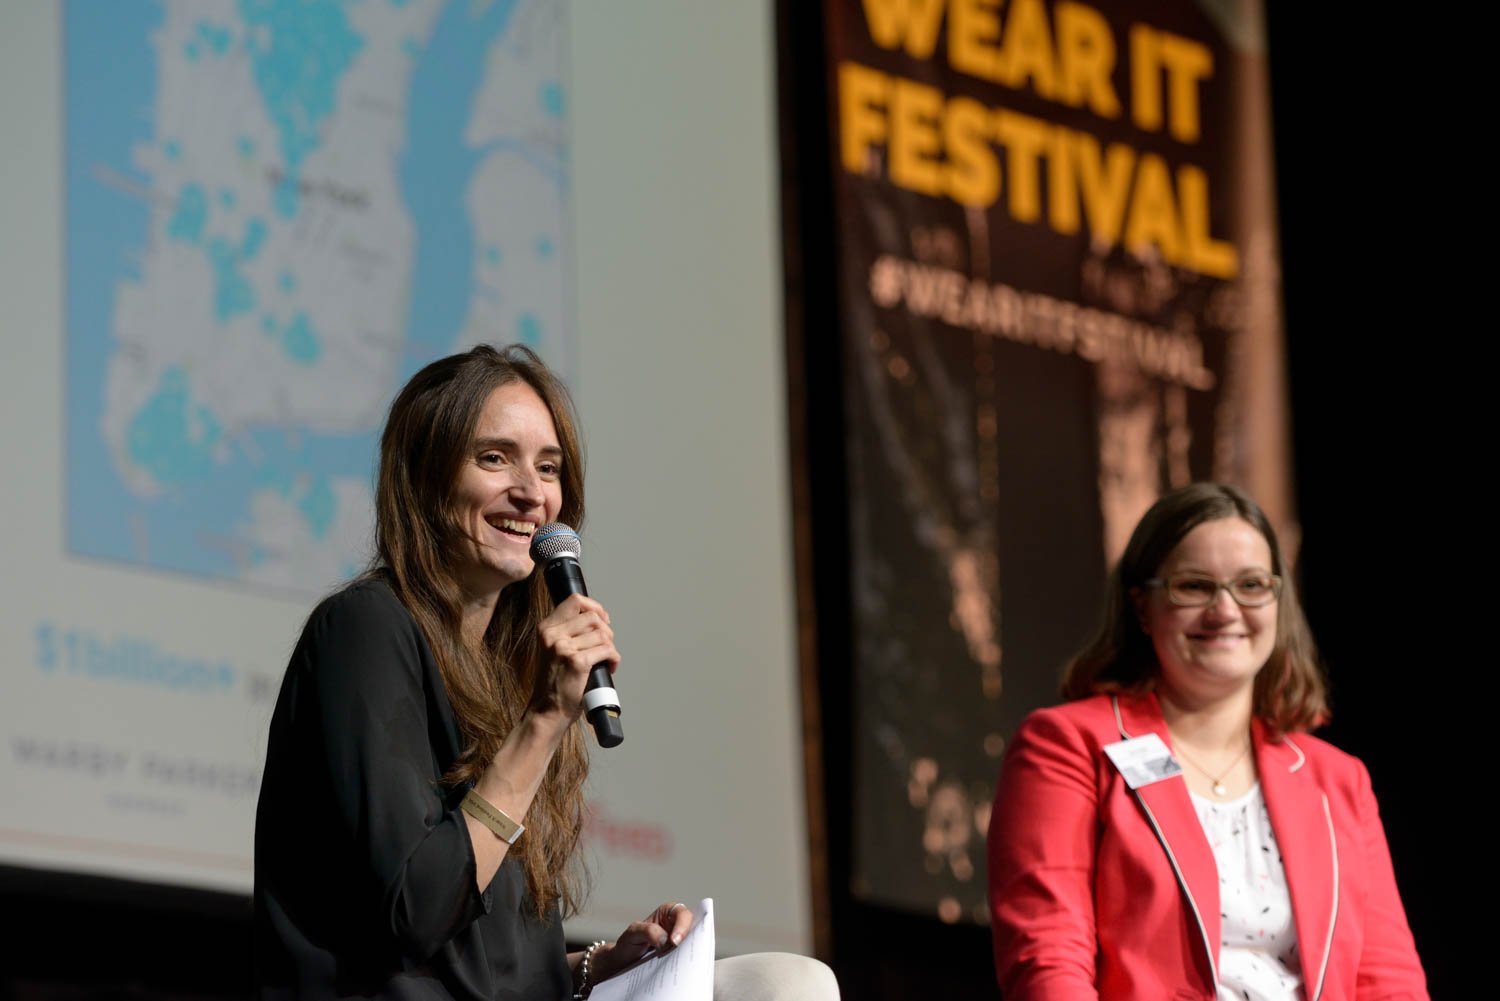 Worldwide Wearables: How Do You Internationalise Your Wearable Startup? with Julia Krüger (right, BERLIN PARTNER) and Ana Arinio (NEW YORK CITY ECONOMICDEVELOPMENT CORPORATION) at the Wear It Festival - The Conference on Wearables, fashion tech, smart clothing and consumer innovation on 19-20 June 2018 at the Kulturbrauerei Berlin - (c) Wear It Berlin / Michael Wittig, Berlin